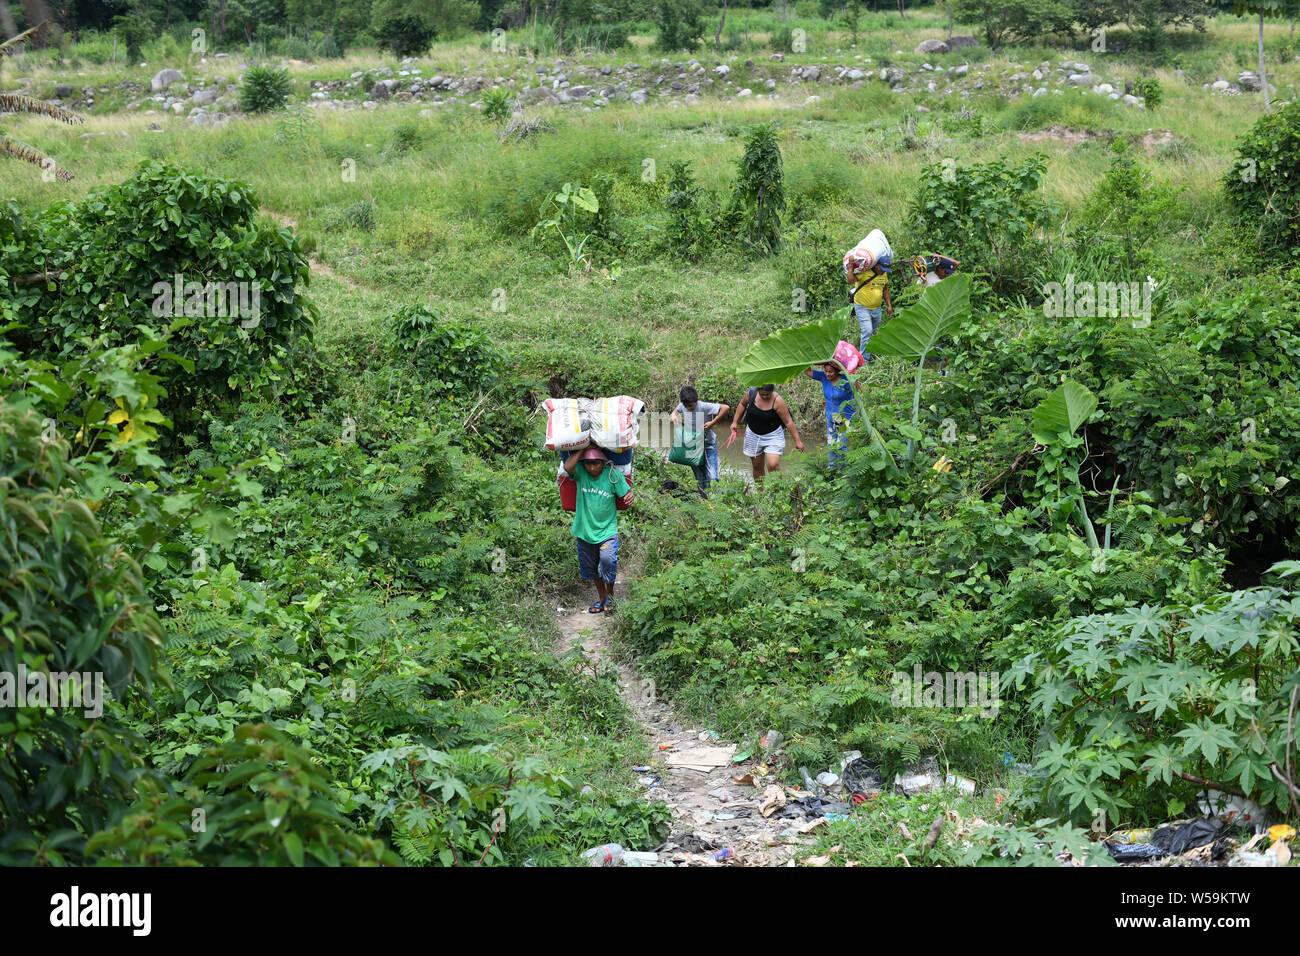 July 25, 2019, Talisman, Chiapas, Mexico: With the help of porters, Central American families and their pets cross into Mexican territory on Thursday, even as Guatemala signed a treaty with the Us designating it a 'safe'' country for migrants. Credit: Miguel Juarez Lugo/ZUMA Wire/Alamy Live News Stock Photo